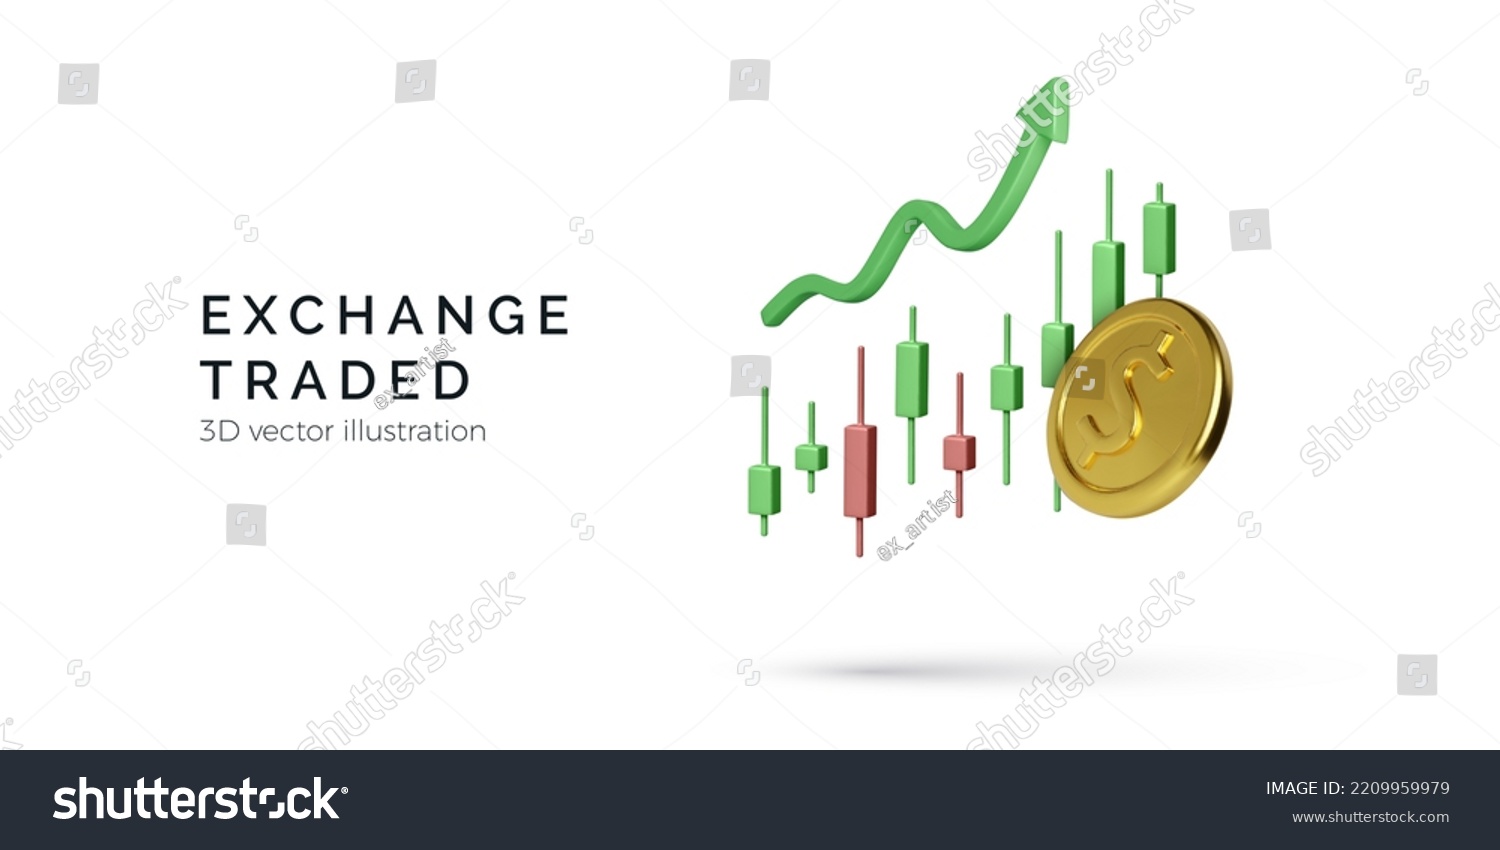 SVG of Candlestick chart with 3D arrow up and gold coin. Stock exchange trade. Business banner for mobile app or online trading platform. Vector illustration svg